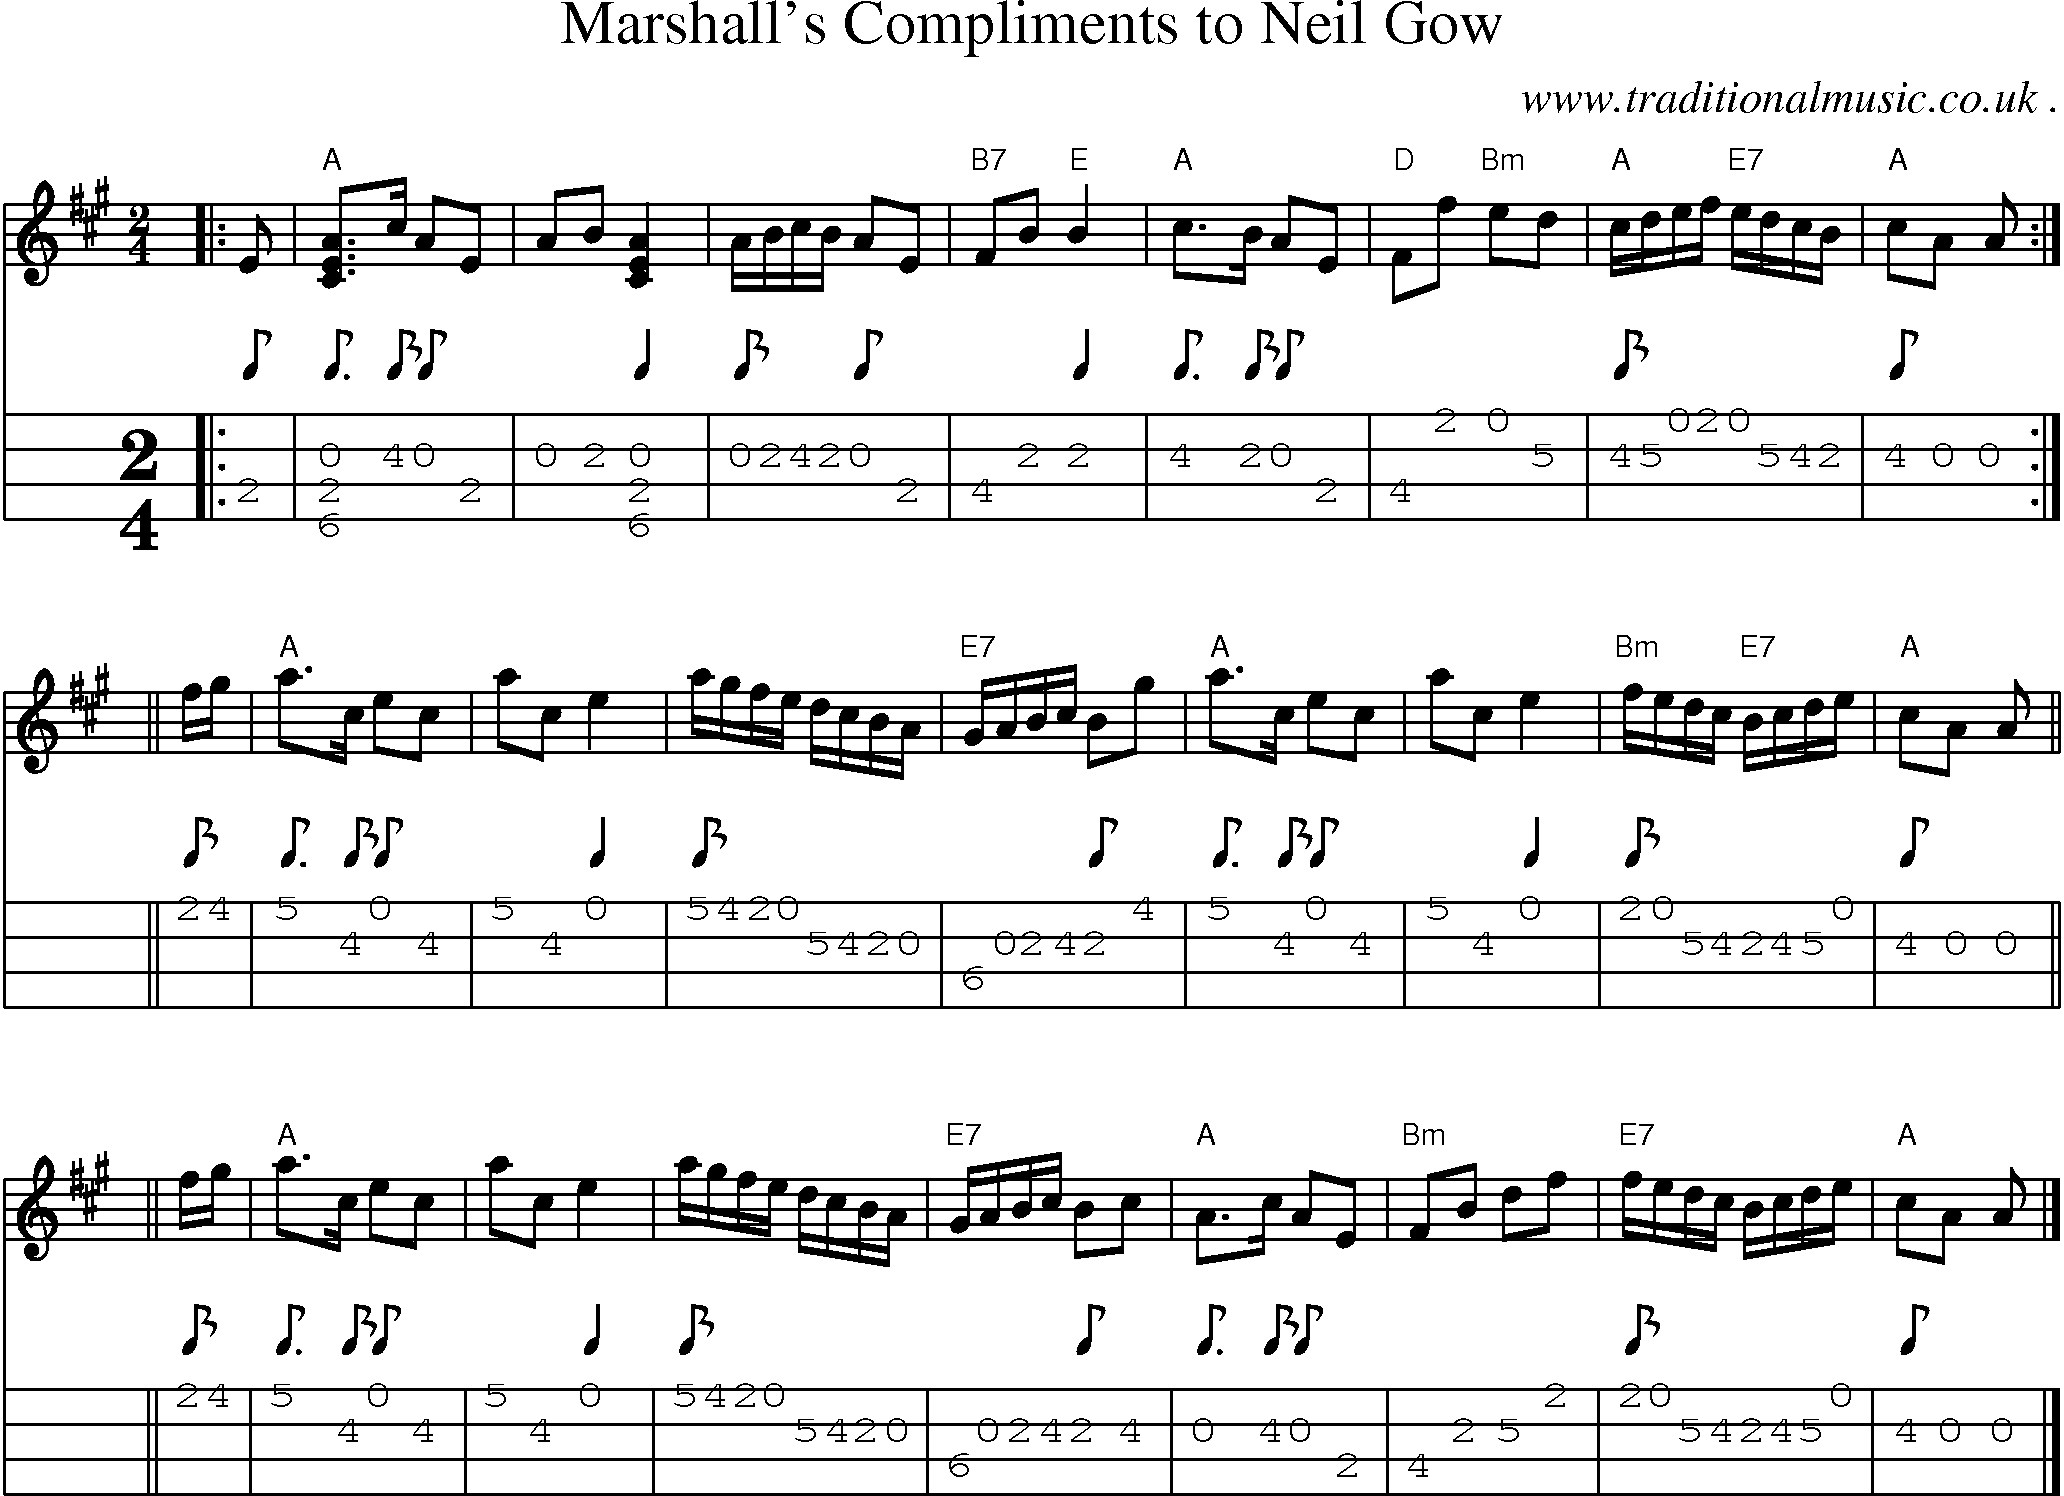 Sheet-music  score, Chords and Mandolin Tabs for Marshalls Compliments To Neil Gow